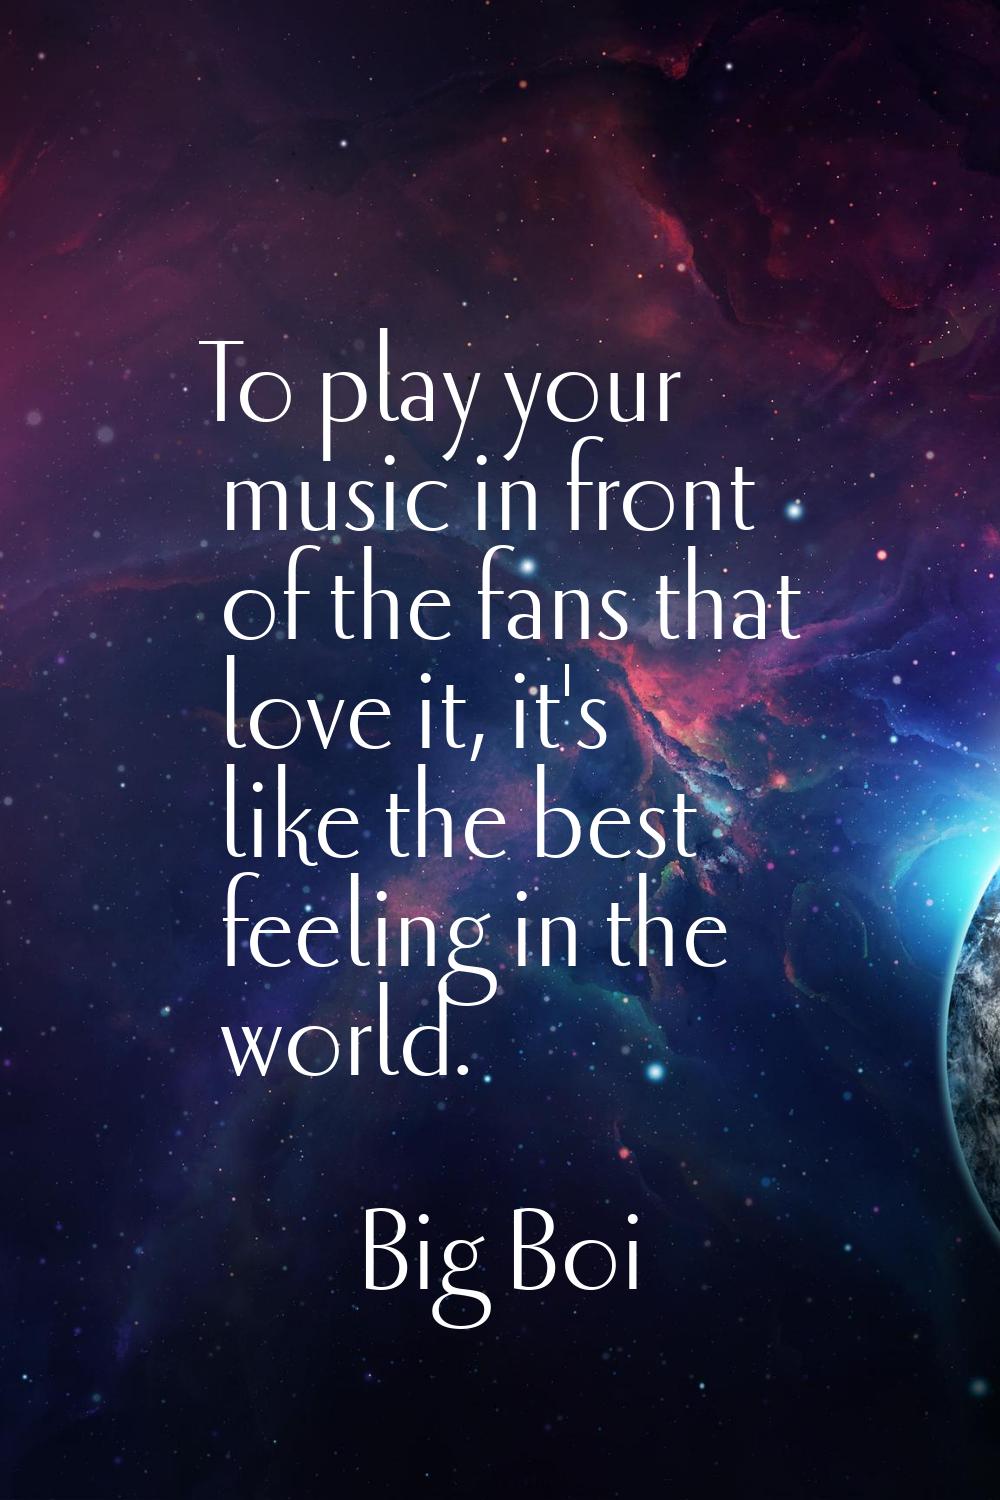 To play your music in front of the fans that love it, it's like the best feeling in the world.